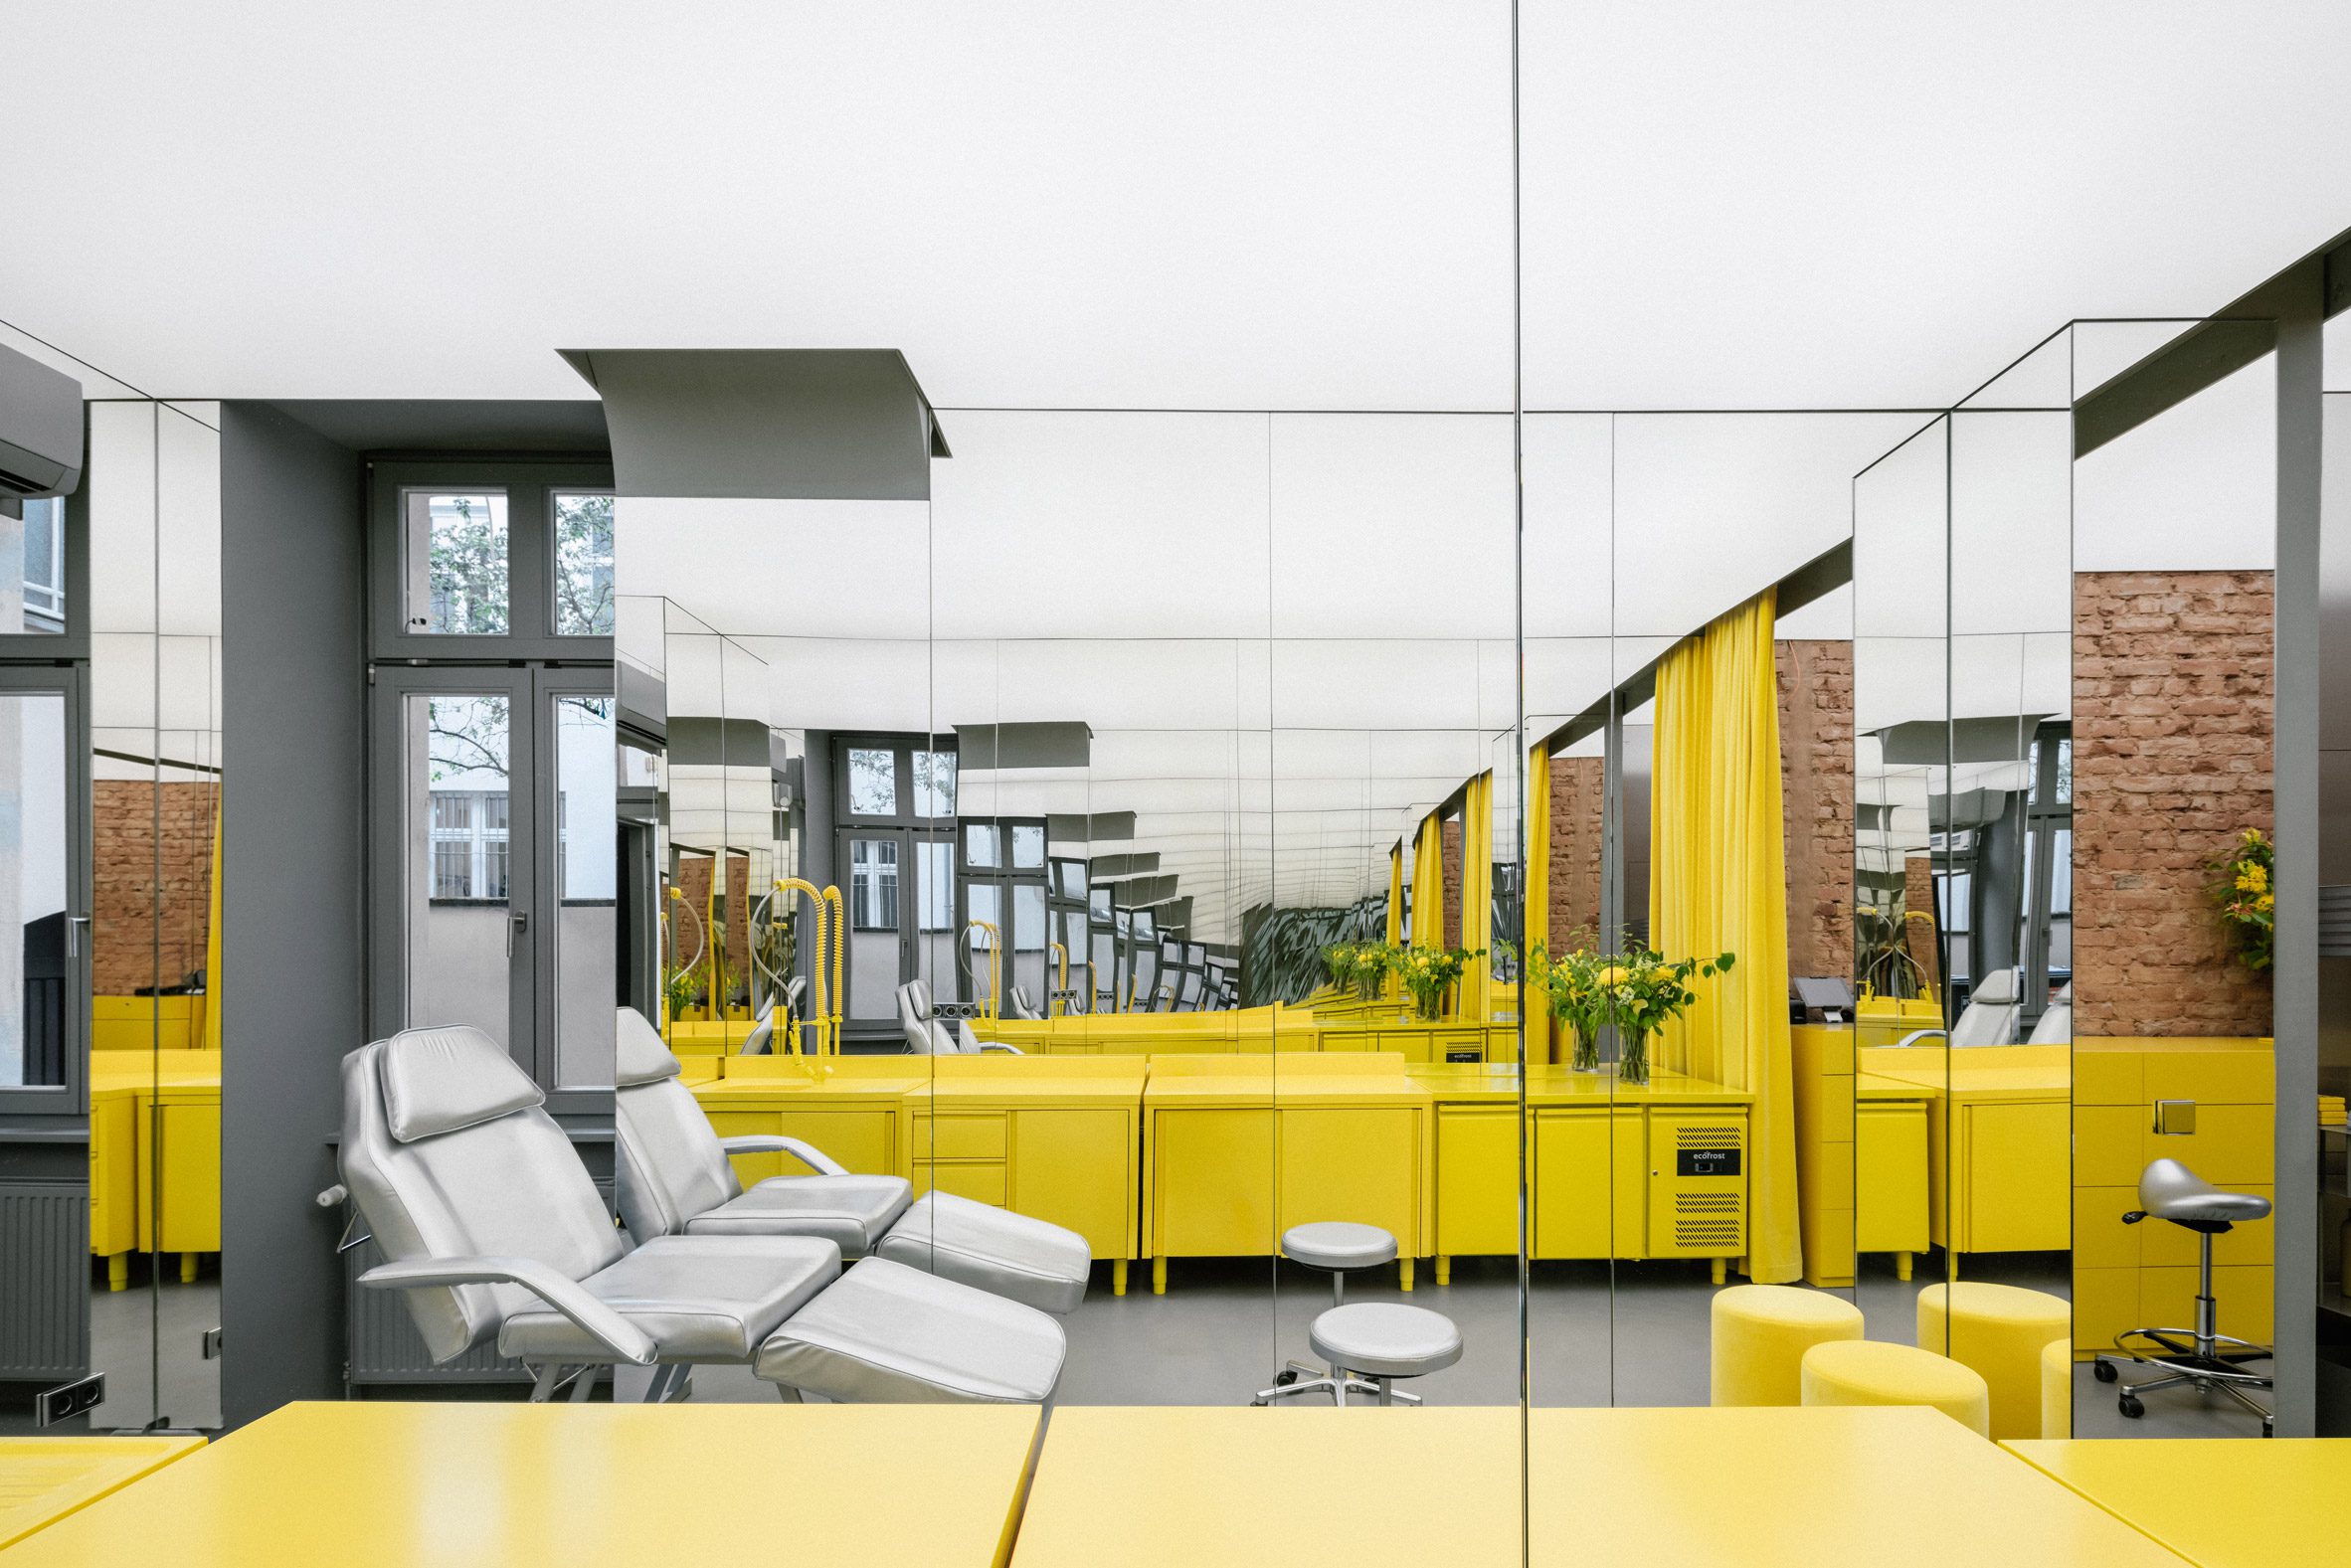 Store interior with stainless steel furniture and yellow sink